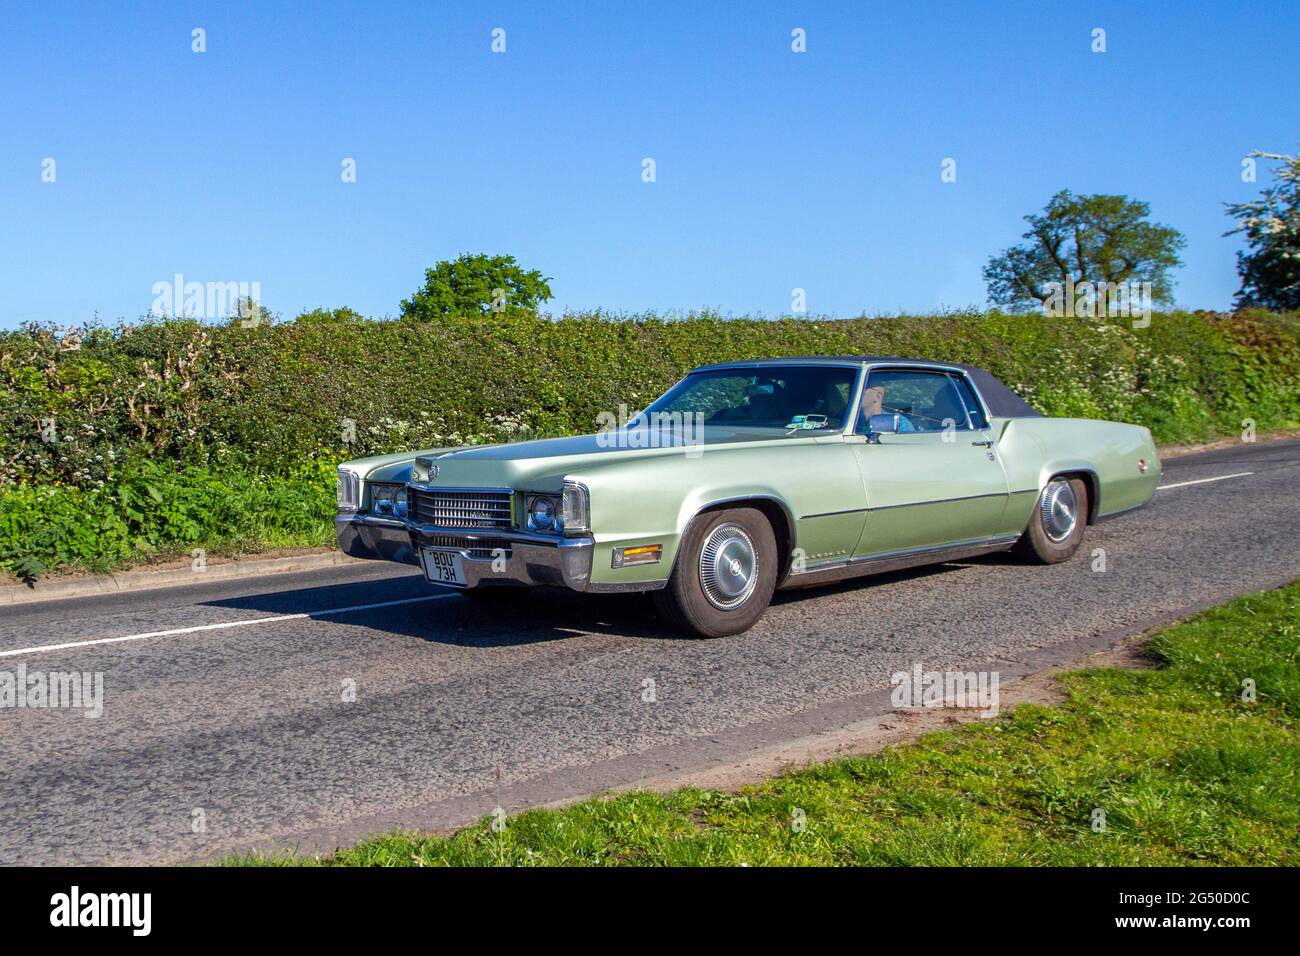 1970 70s seventies green American Cadillac Eldorado 8200cc en-route to Capesthorne Hall classic May car show, Cheshire, UK Stock Photo